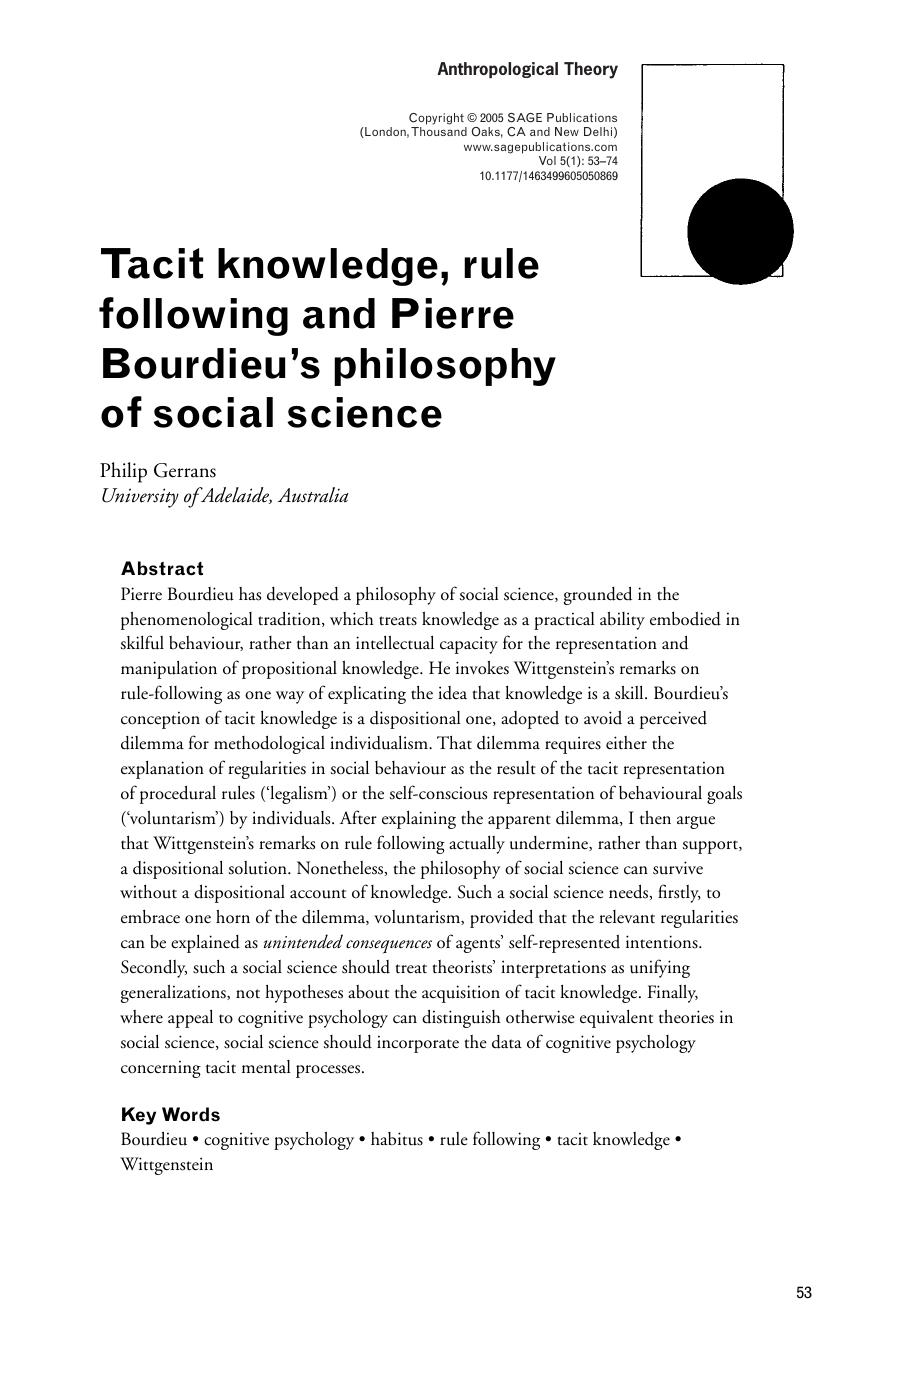 Tacit Knowledge, Rule Following And Pierre Bourdieu's Philosophy of Social Science